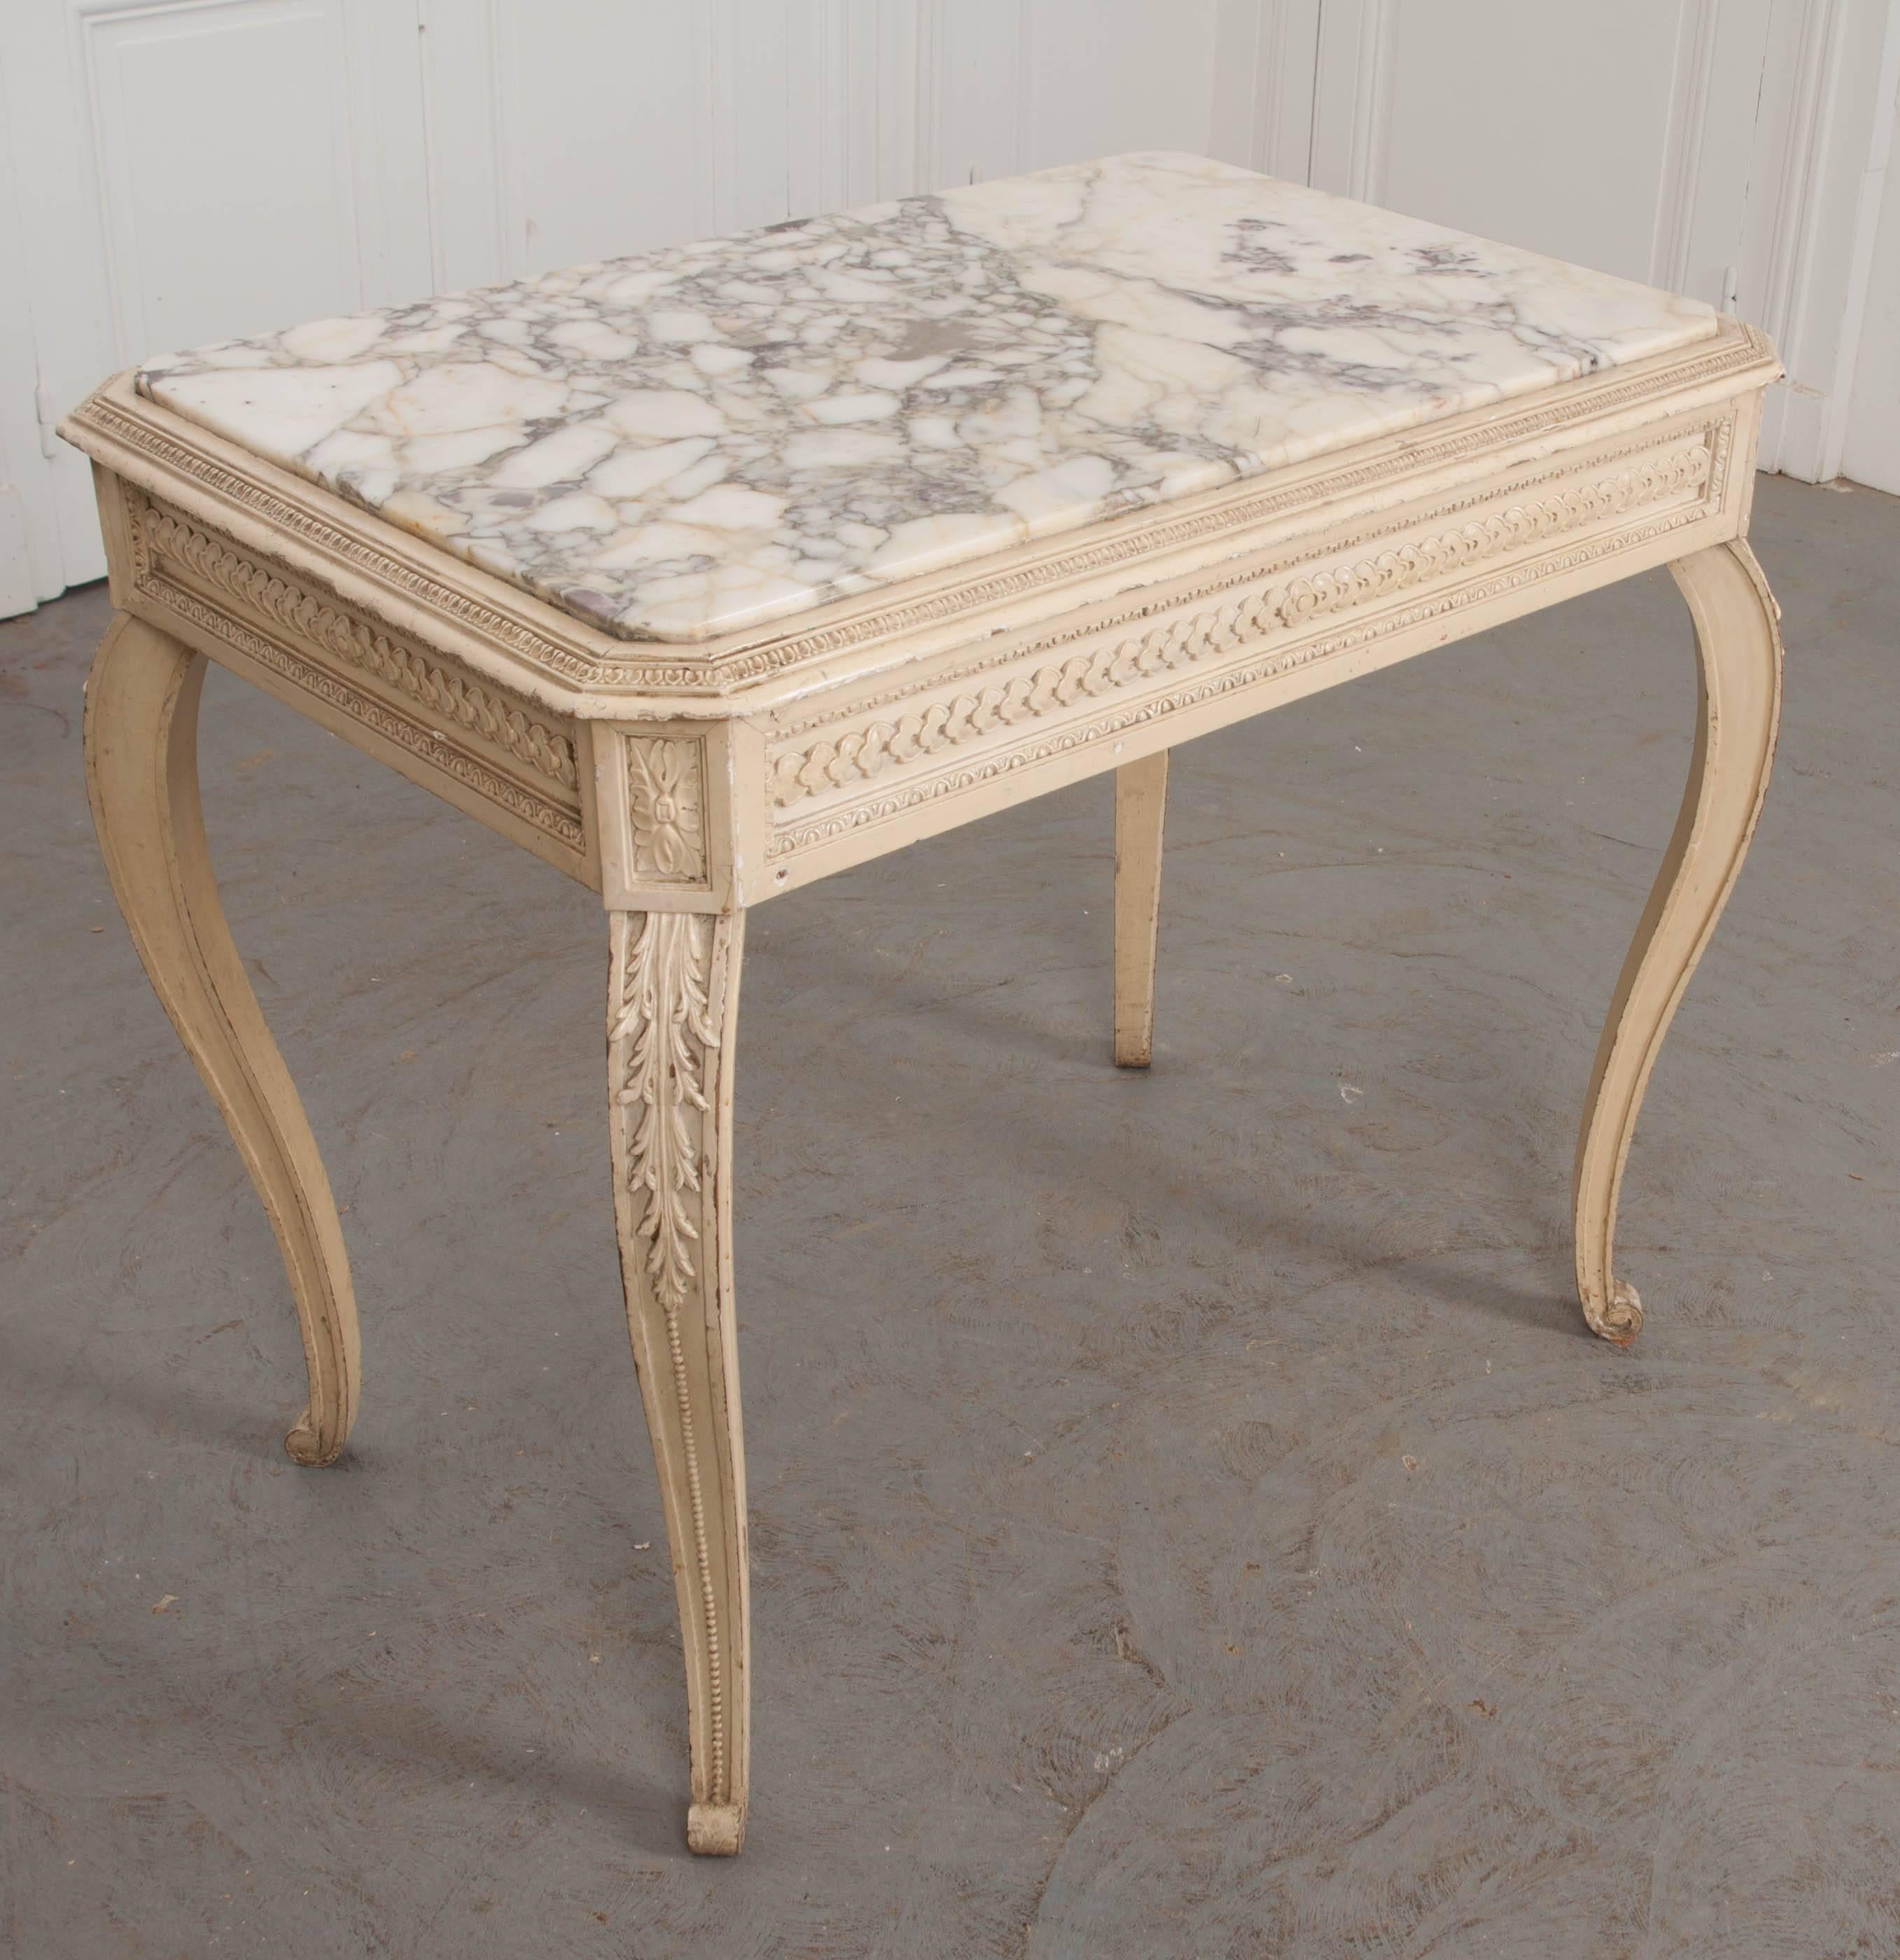 French 19th Century Louis XV Painted Marble-Top Table In Good Condition For Sale In Baton Rouge, LA